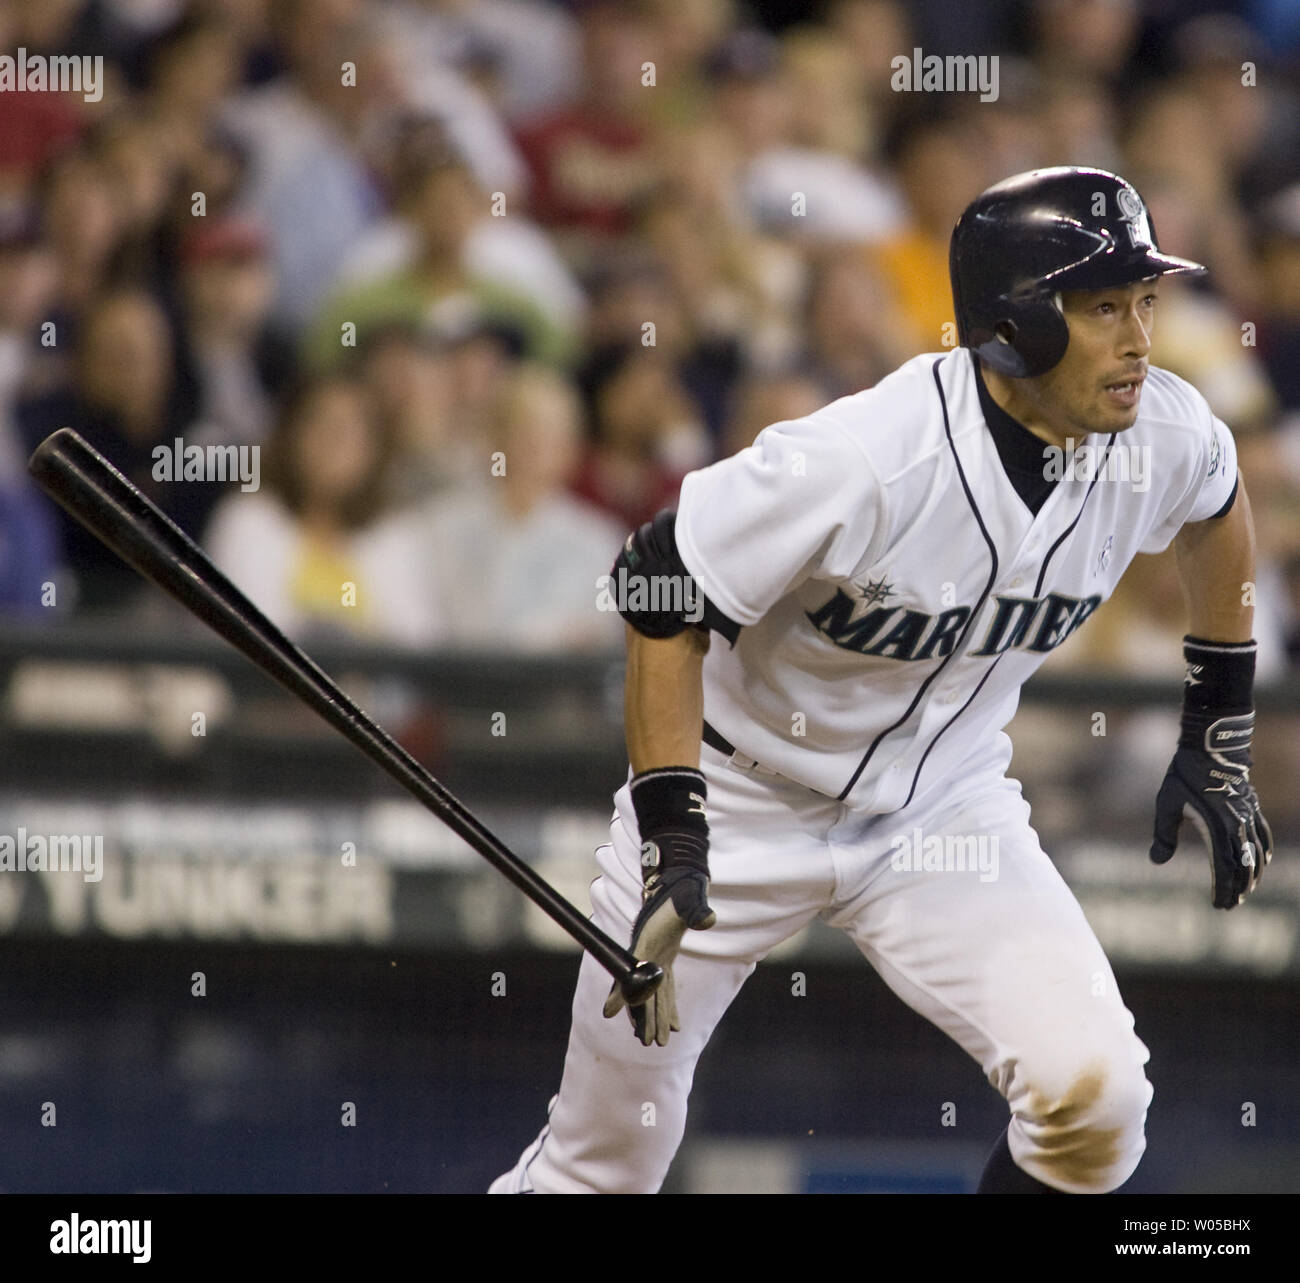 Seattle Mariners'  Ichiro Suzuki watches his single down the first base line against Arizona Diamondbacks in the fifth inning  at SAFECO Field in Seattle on June 21, 2009. Suzuki recorded his 1,900th major league hit on a 70-foot roller down the first-base line. He sheepishly acknowledged the crowd with a tip of the cap when the milestone was displayed on the scoreboard. The Mariners beat the Diamondbacks 3-2.  (UPI Photo/Jim Bryant) Stock Photo